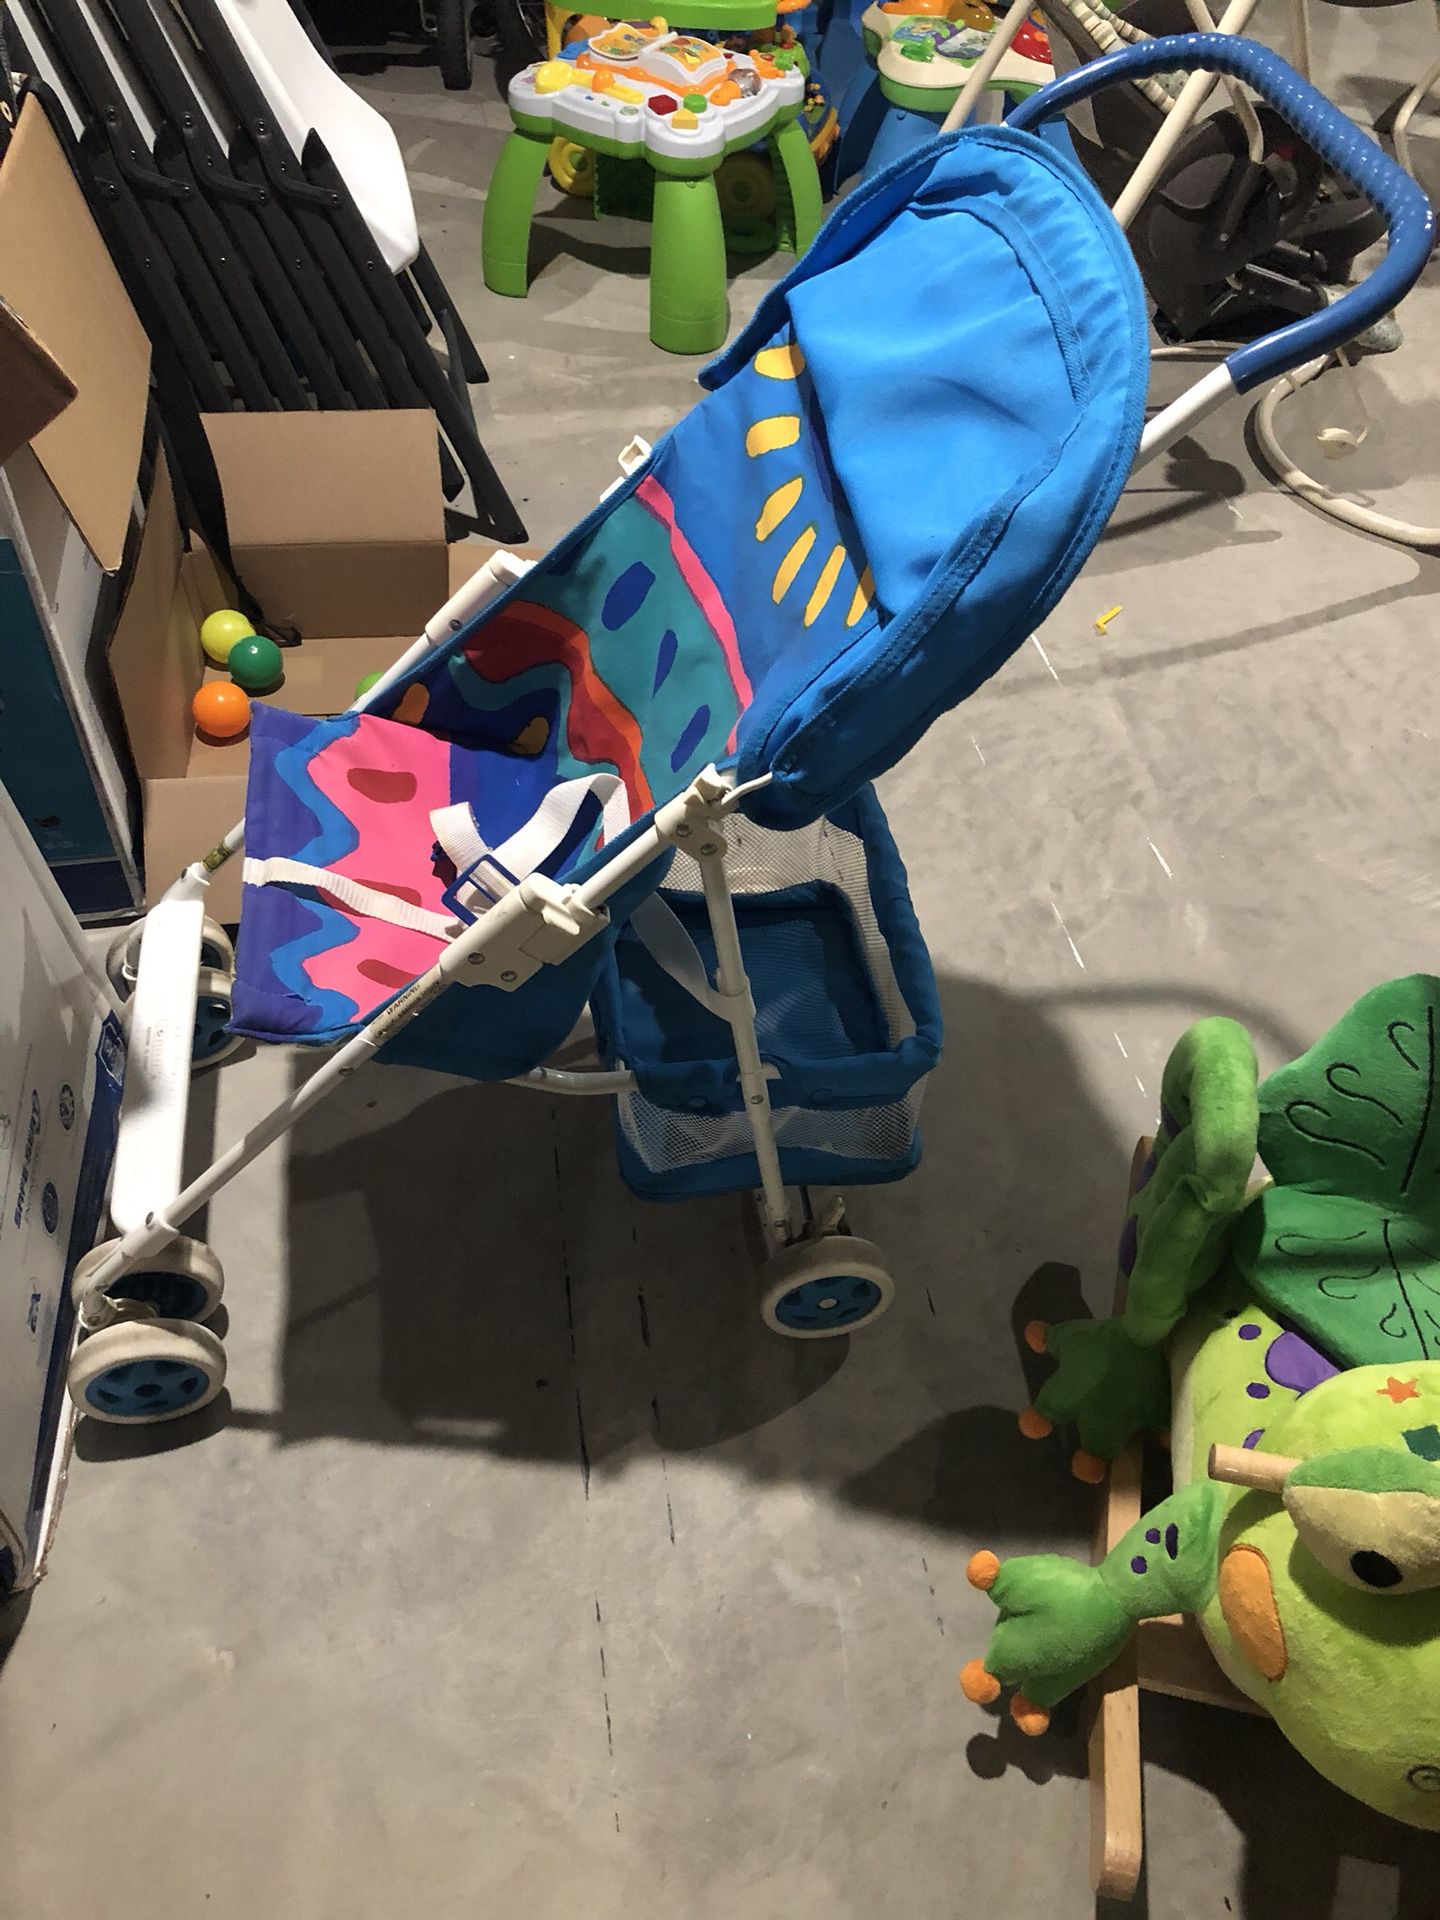 Colorful Graco stroller